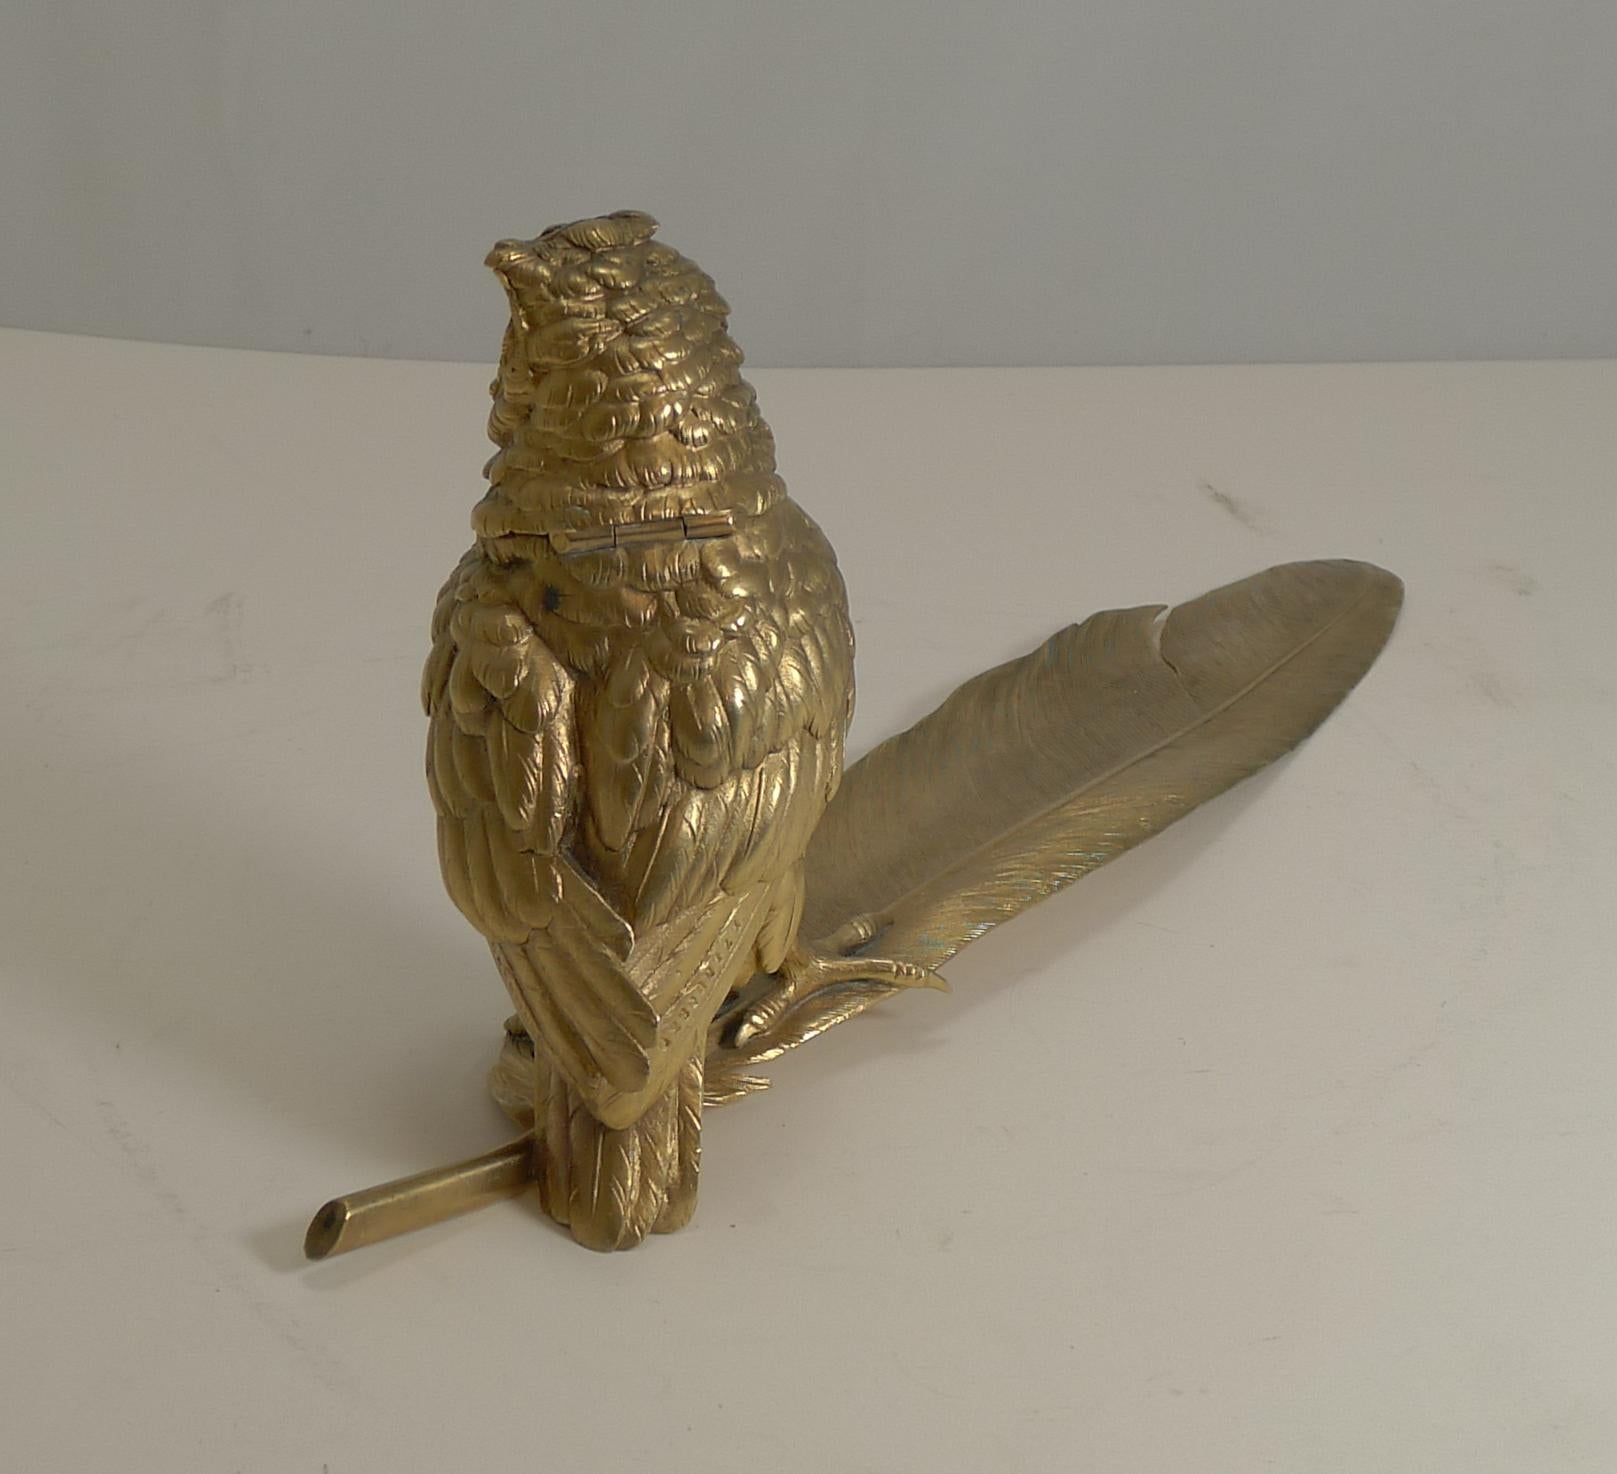 A magnificent and grand late Victorian Austrian desk set, made from cast bronze, beautifully finished in gold.

The cast Owl is a figural inkwell with a hinged lid revealing a glass ink chamber within. This is attached to a beautifully executed